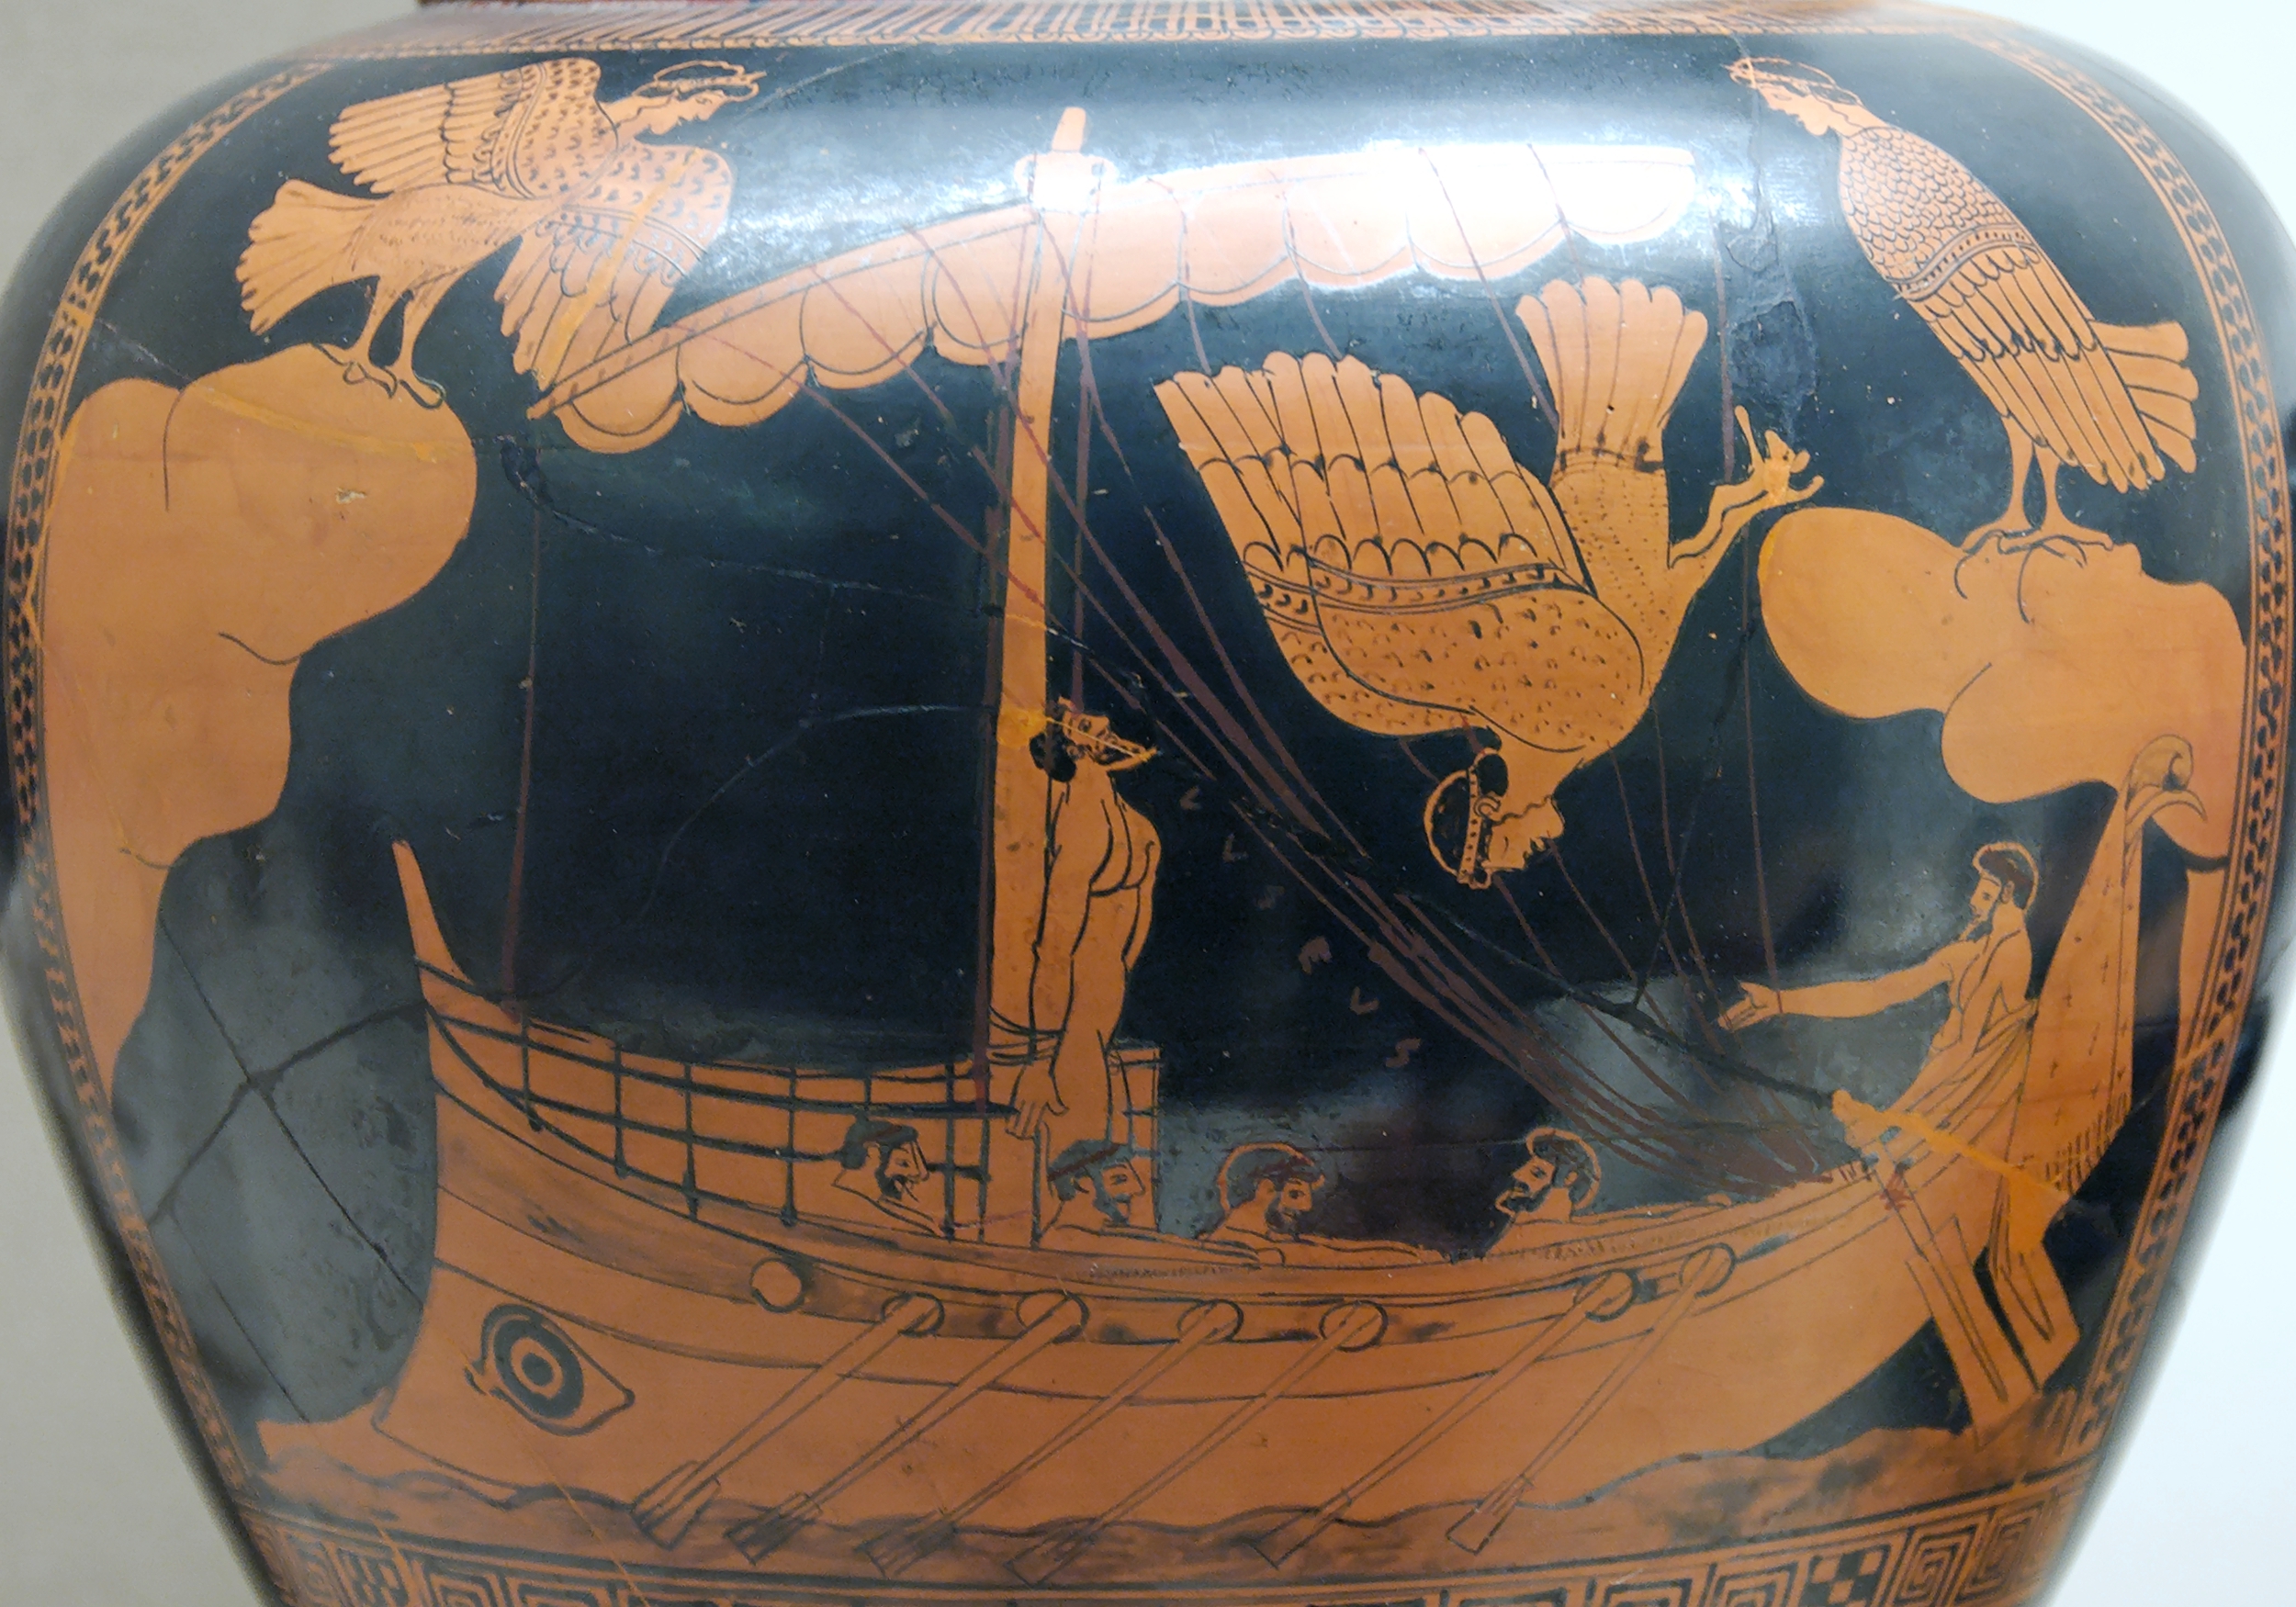 Detail from Odysseus and the Sirens, an Attic red-figured vase from 480-470 BC. British Museum. Image source: https://en.wikipedia.org/wiki/Siren_%28mythology%29#/media/File:Odysseus_Sirens_BM_E440_n2.jpg